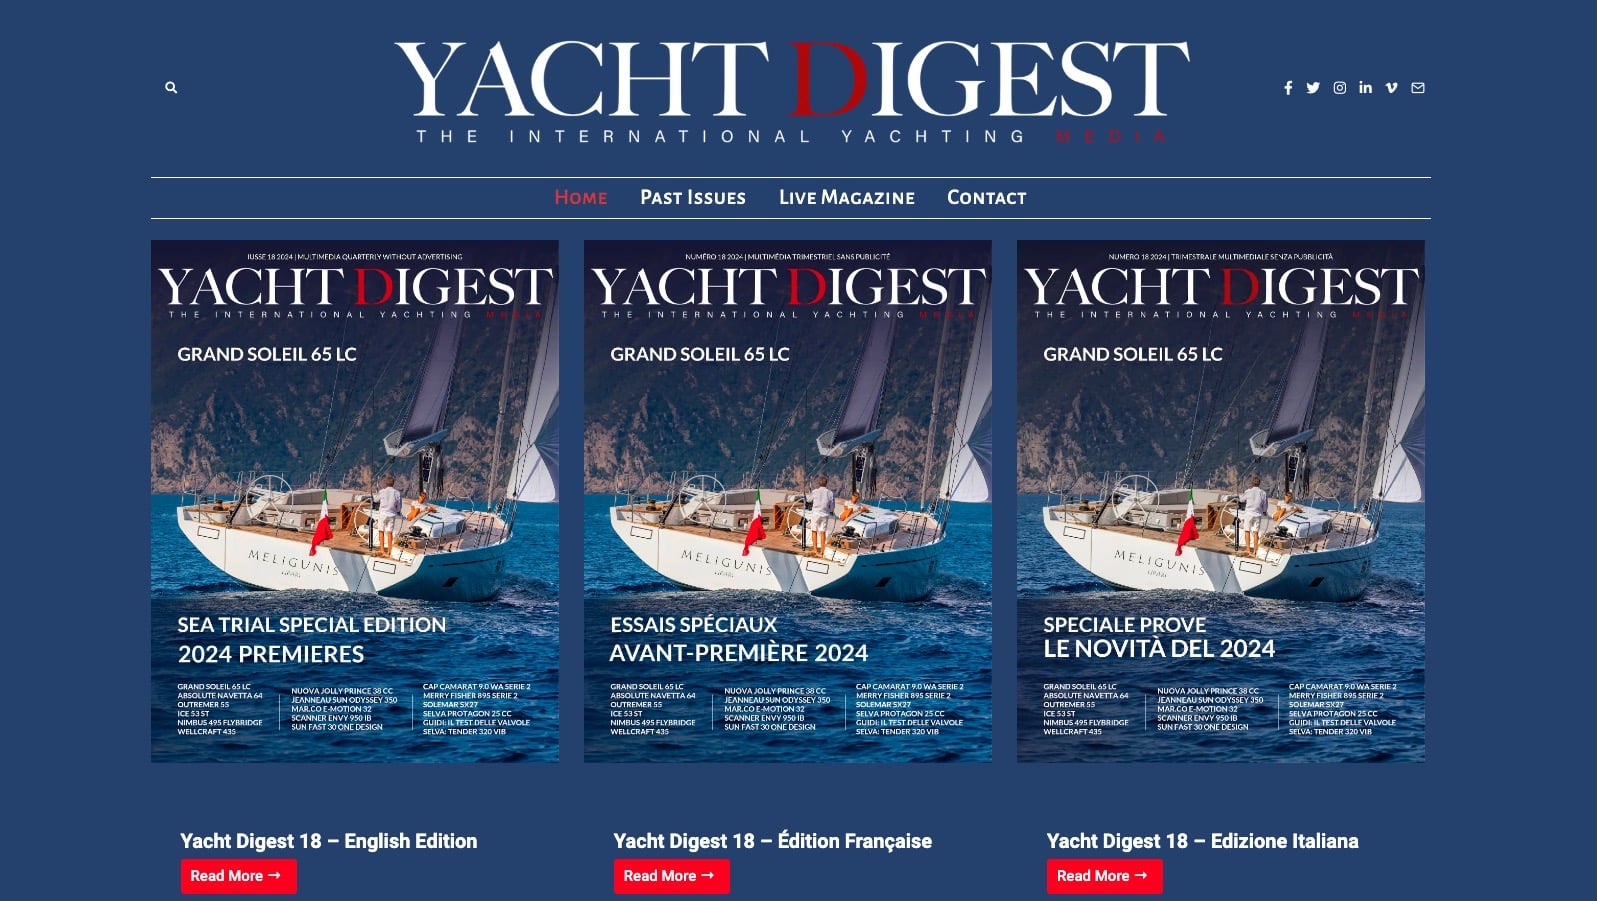 Yacht Digest 18 is now online, featuring many not-to-be-missed sea trials